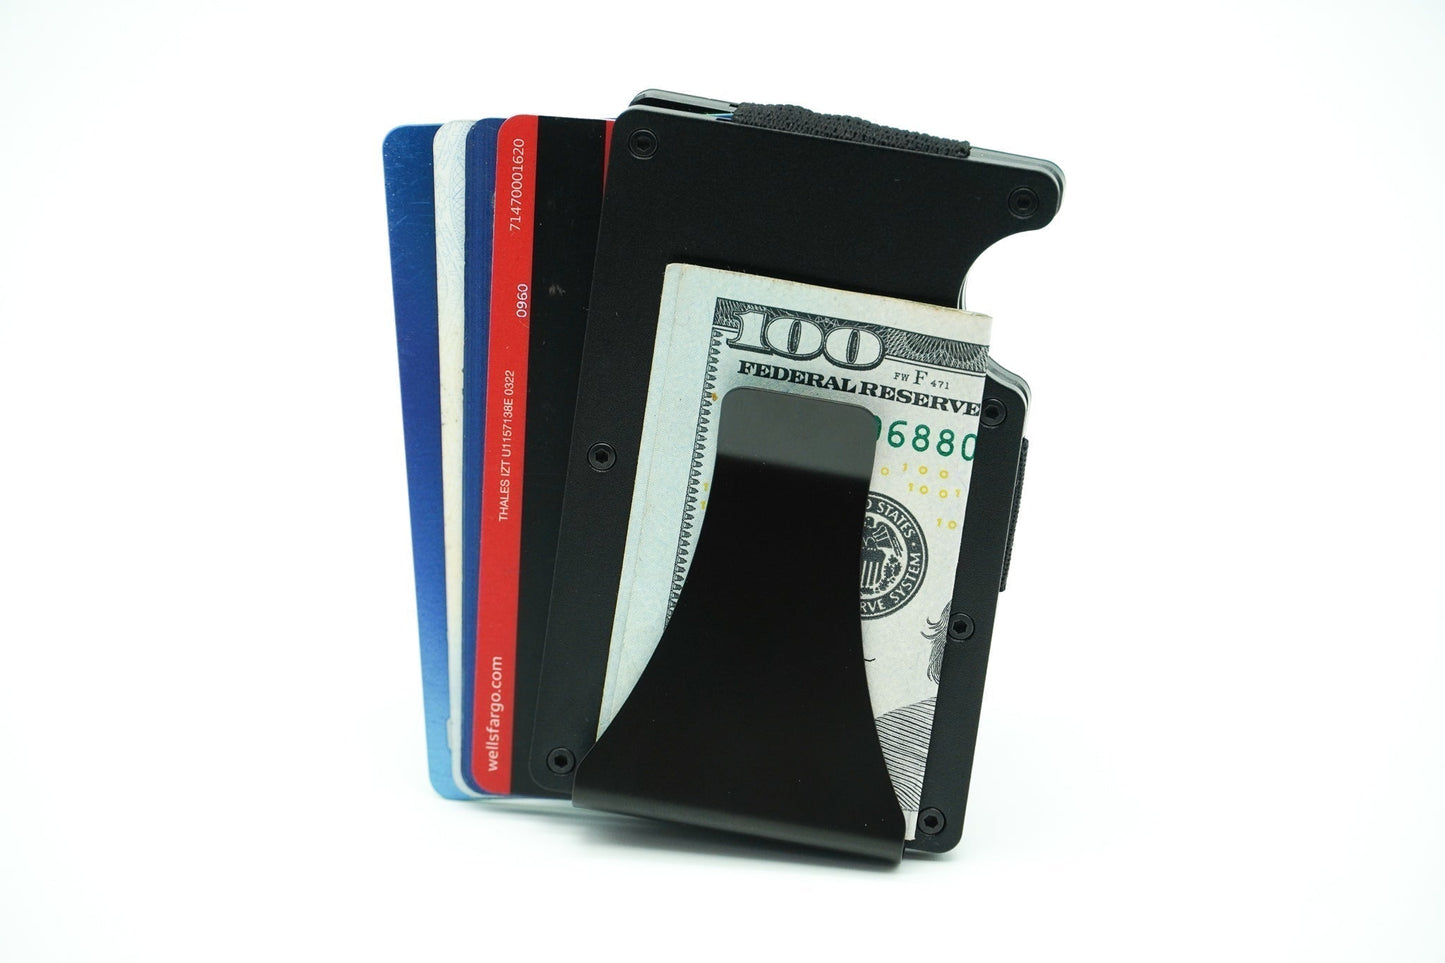 Wallet With Money Clip (LAST RONIN)